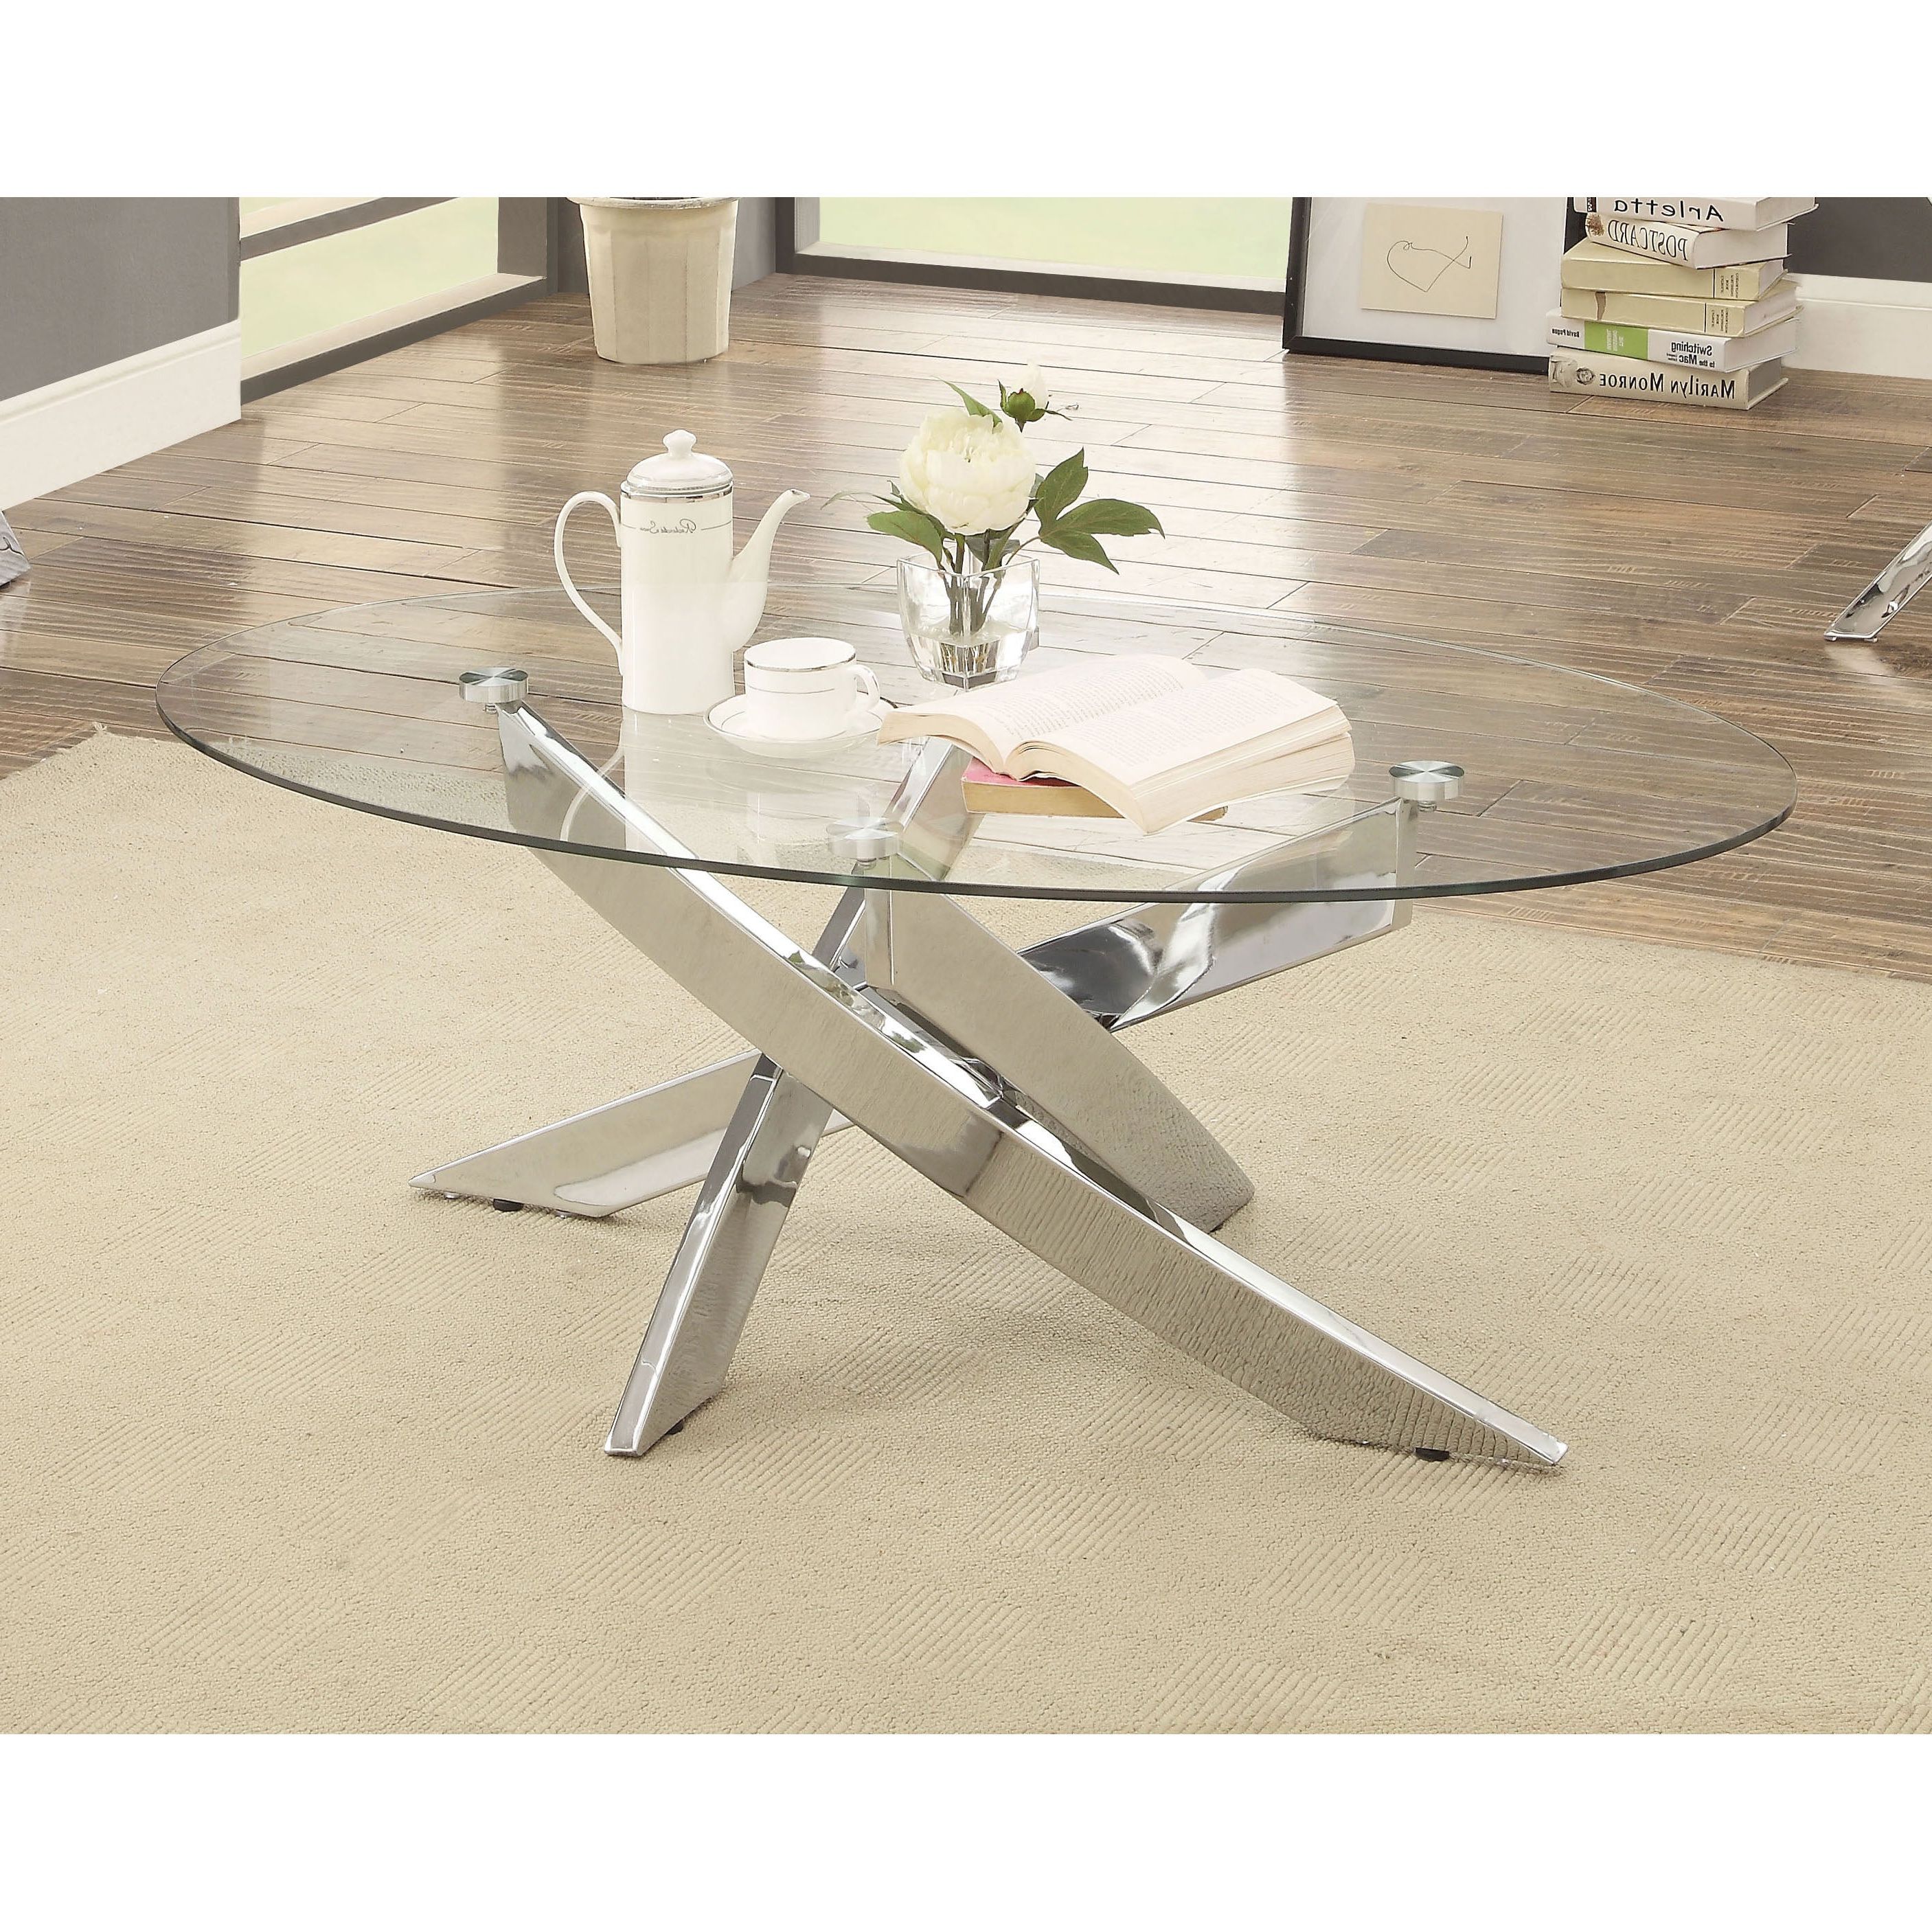 Propel Modern Chrome Oval Coffee Tablefoa Throughout Current Propel Modern Chrome Oval Coffee Tables (View 1 of 20)